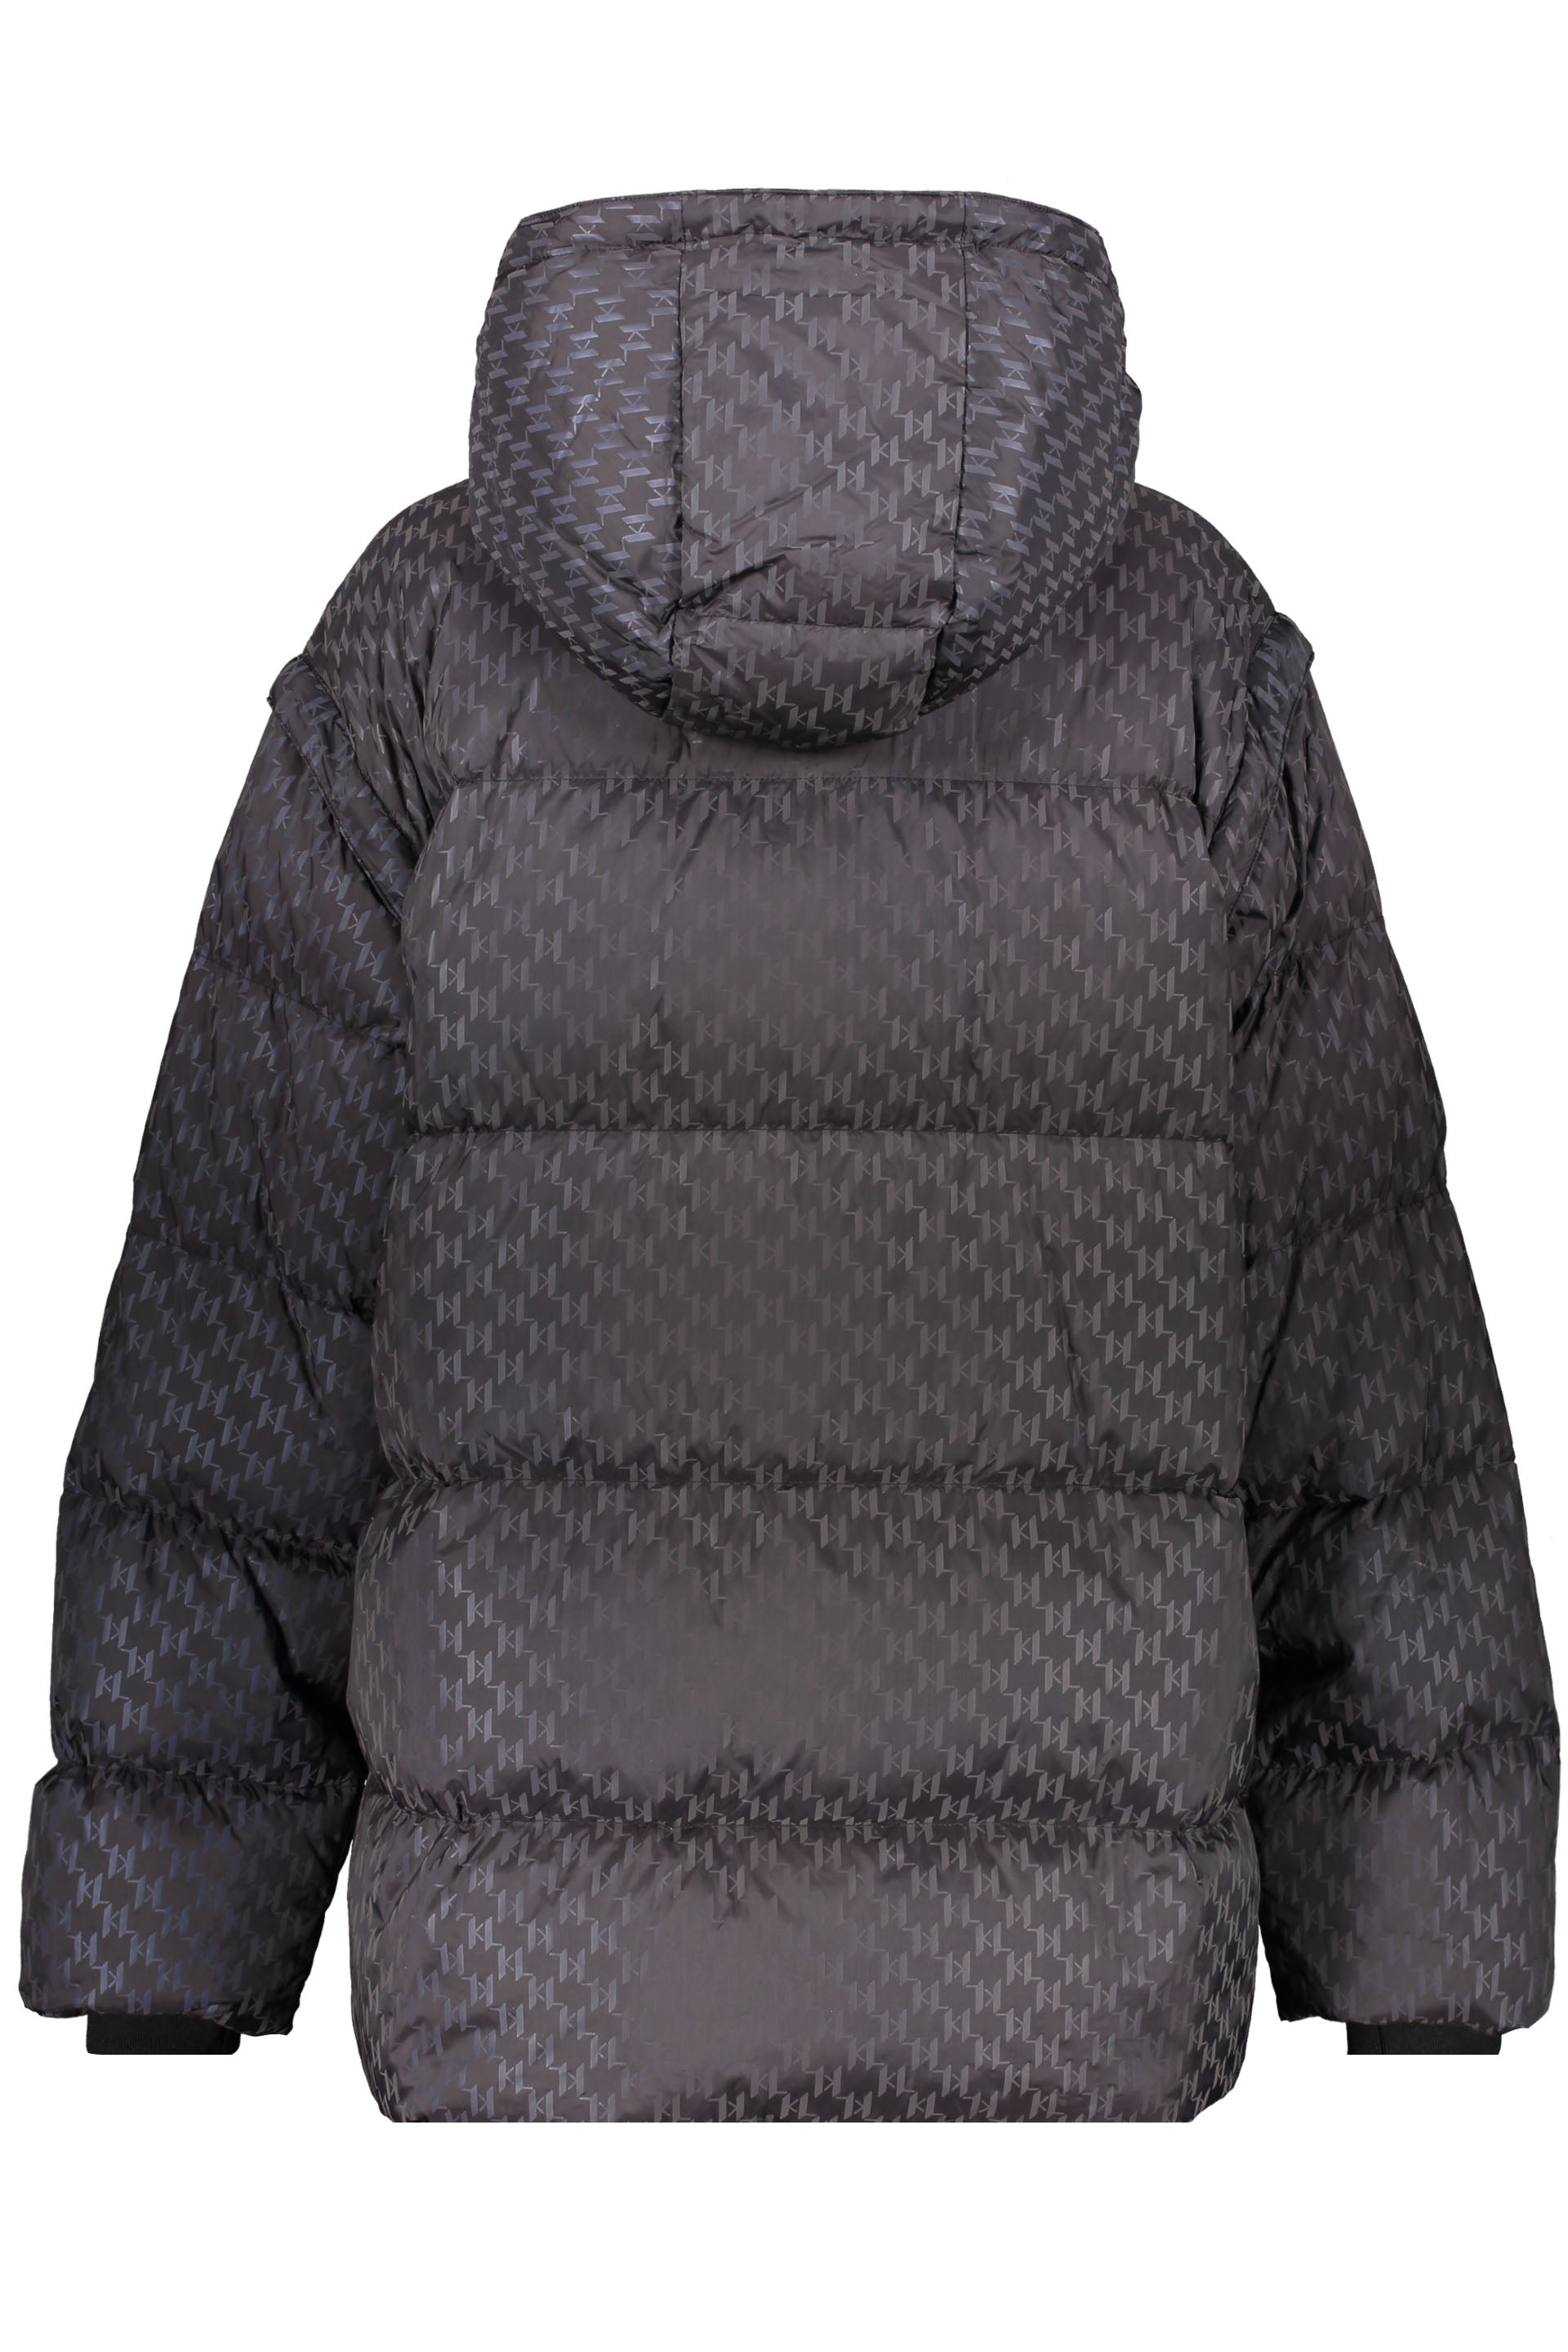 Hooded nylon down jacket-Karl Lagerfeld-OUTLET-SALE-ARCHIVIST